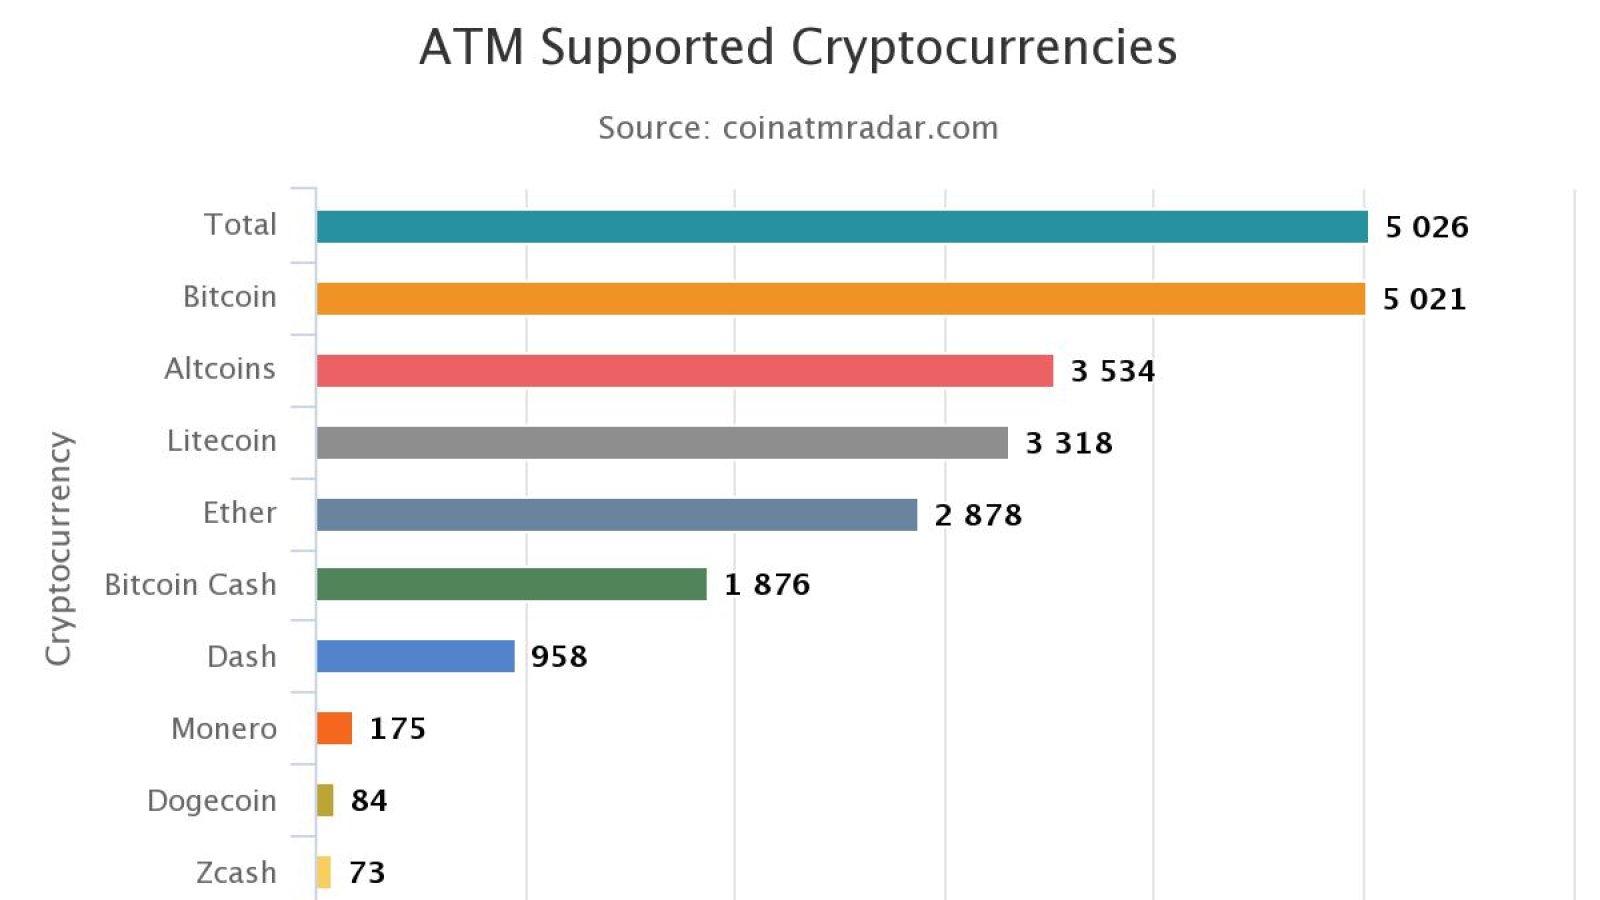  ATMs cryptocurrencies list